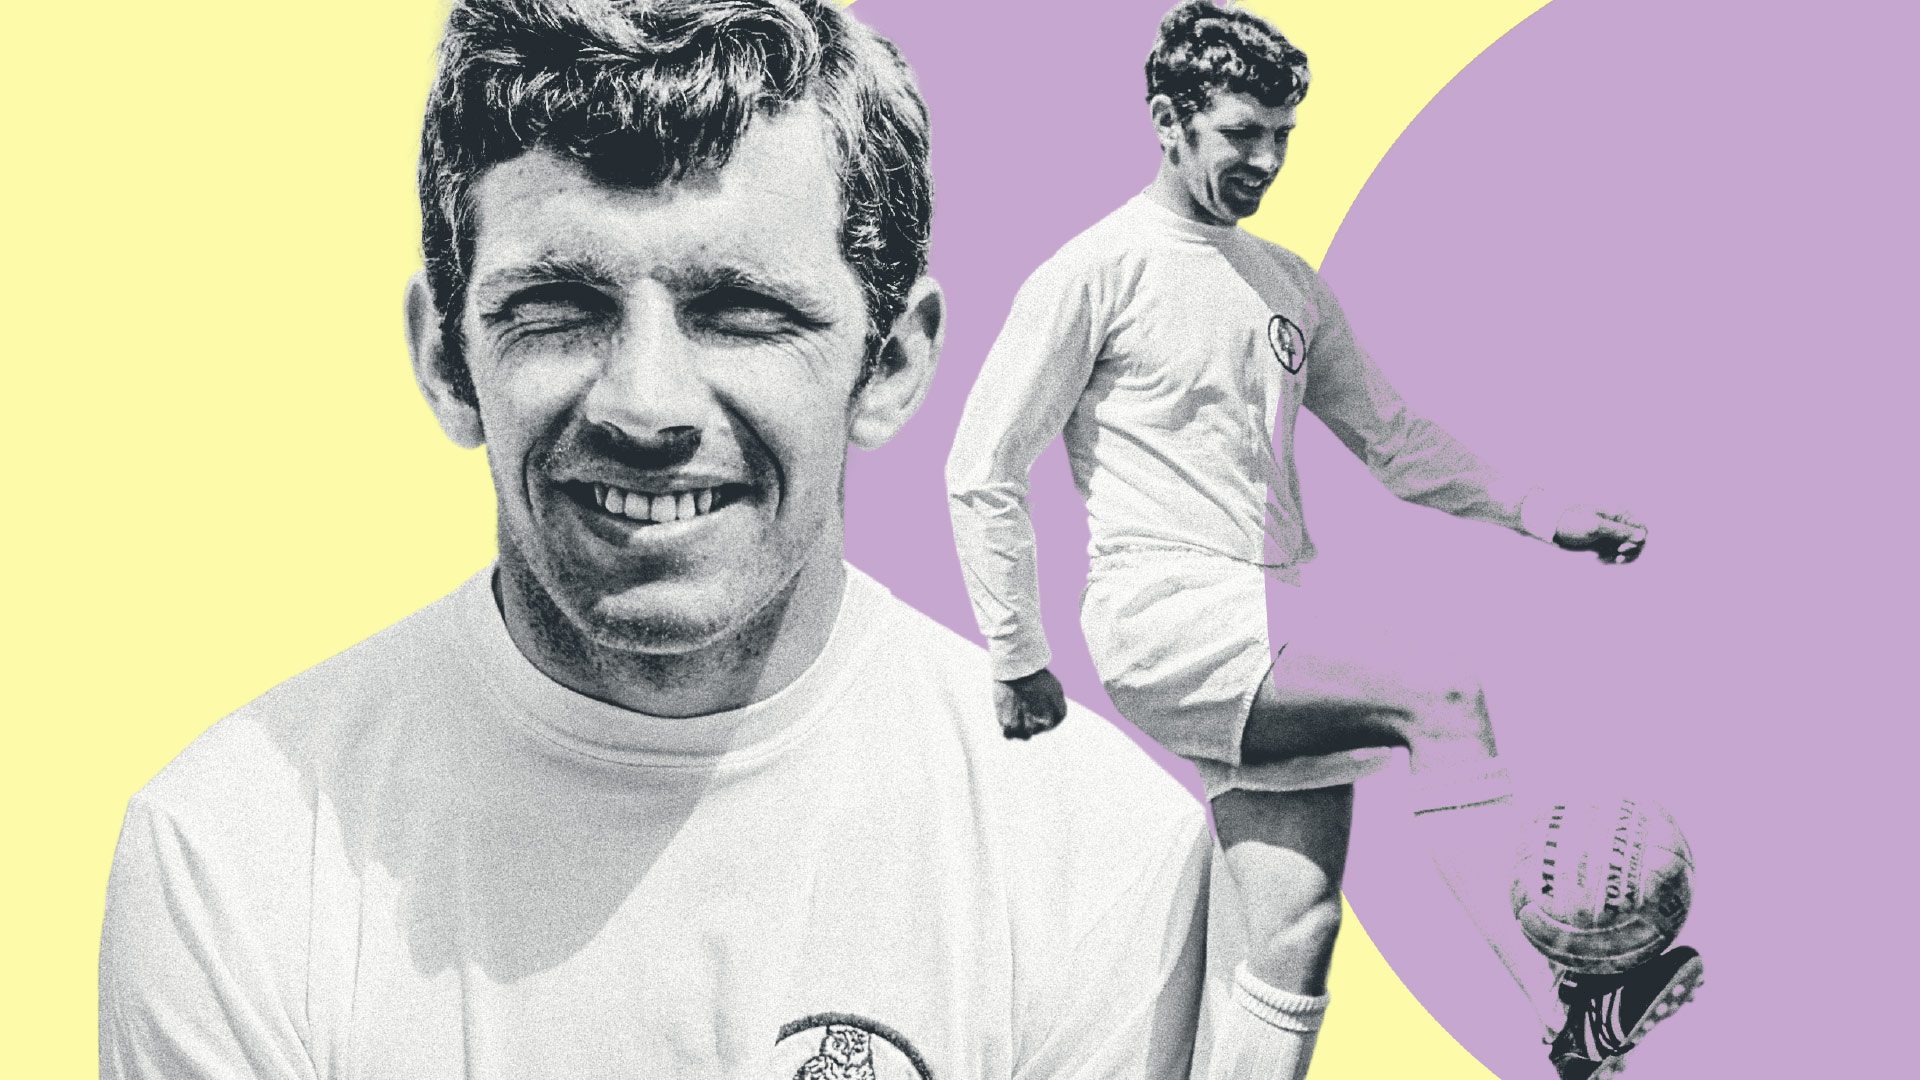 Two photos of Johnny Giles: on the left him smiling for the camera, on the right him showing off doing some kick-ups